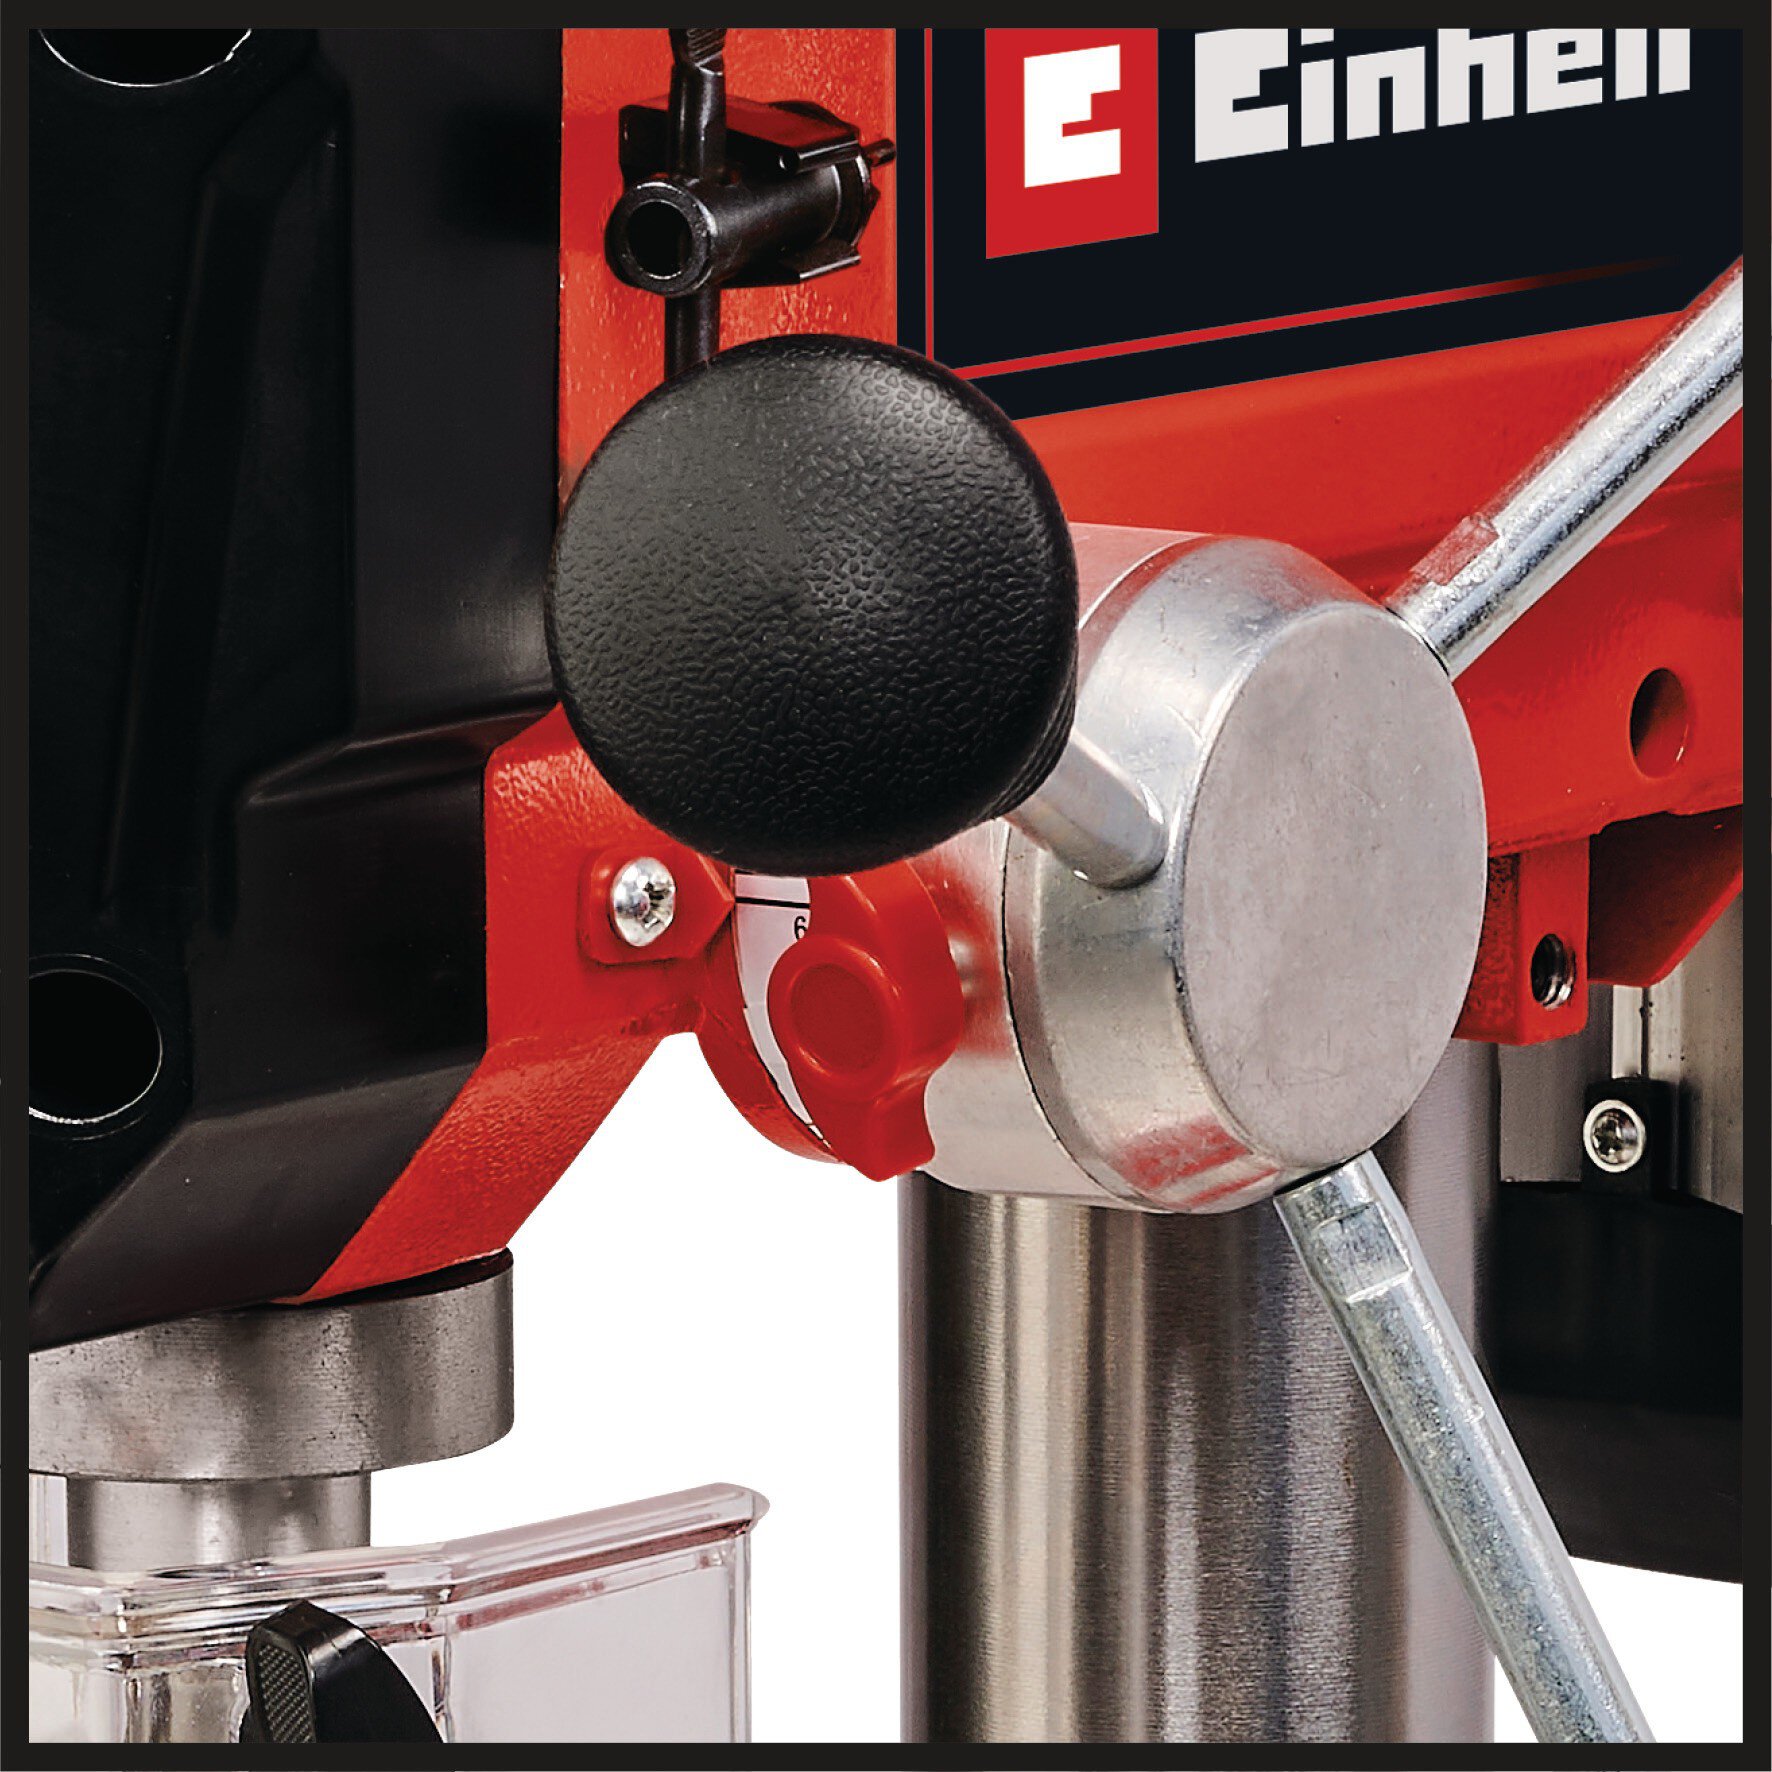 einhell-classic-bench-drill-4520597-detail_image-002